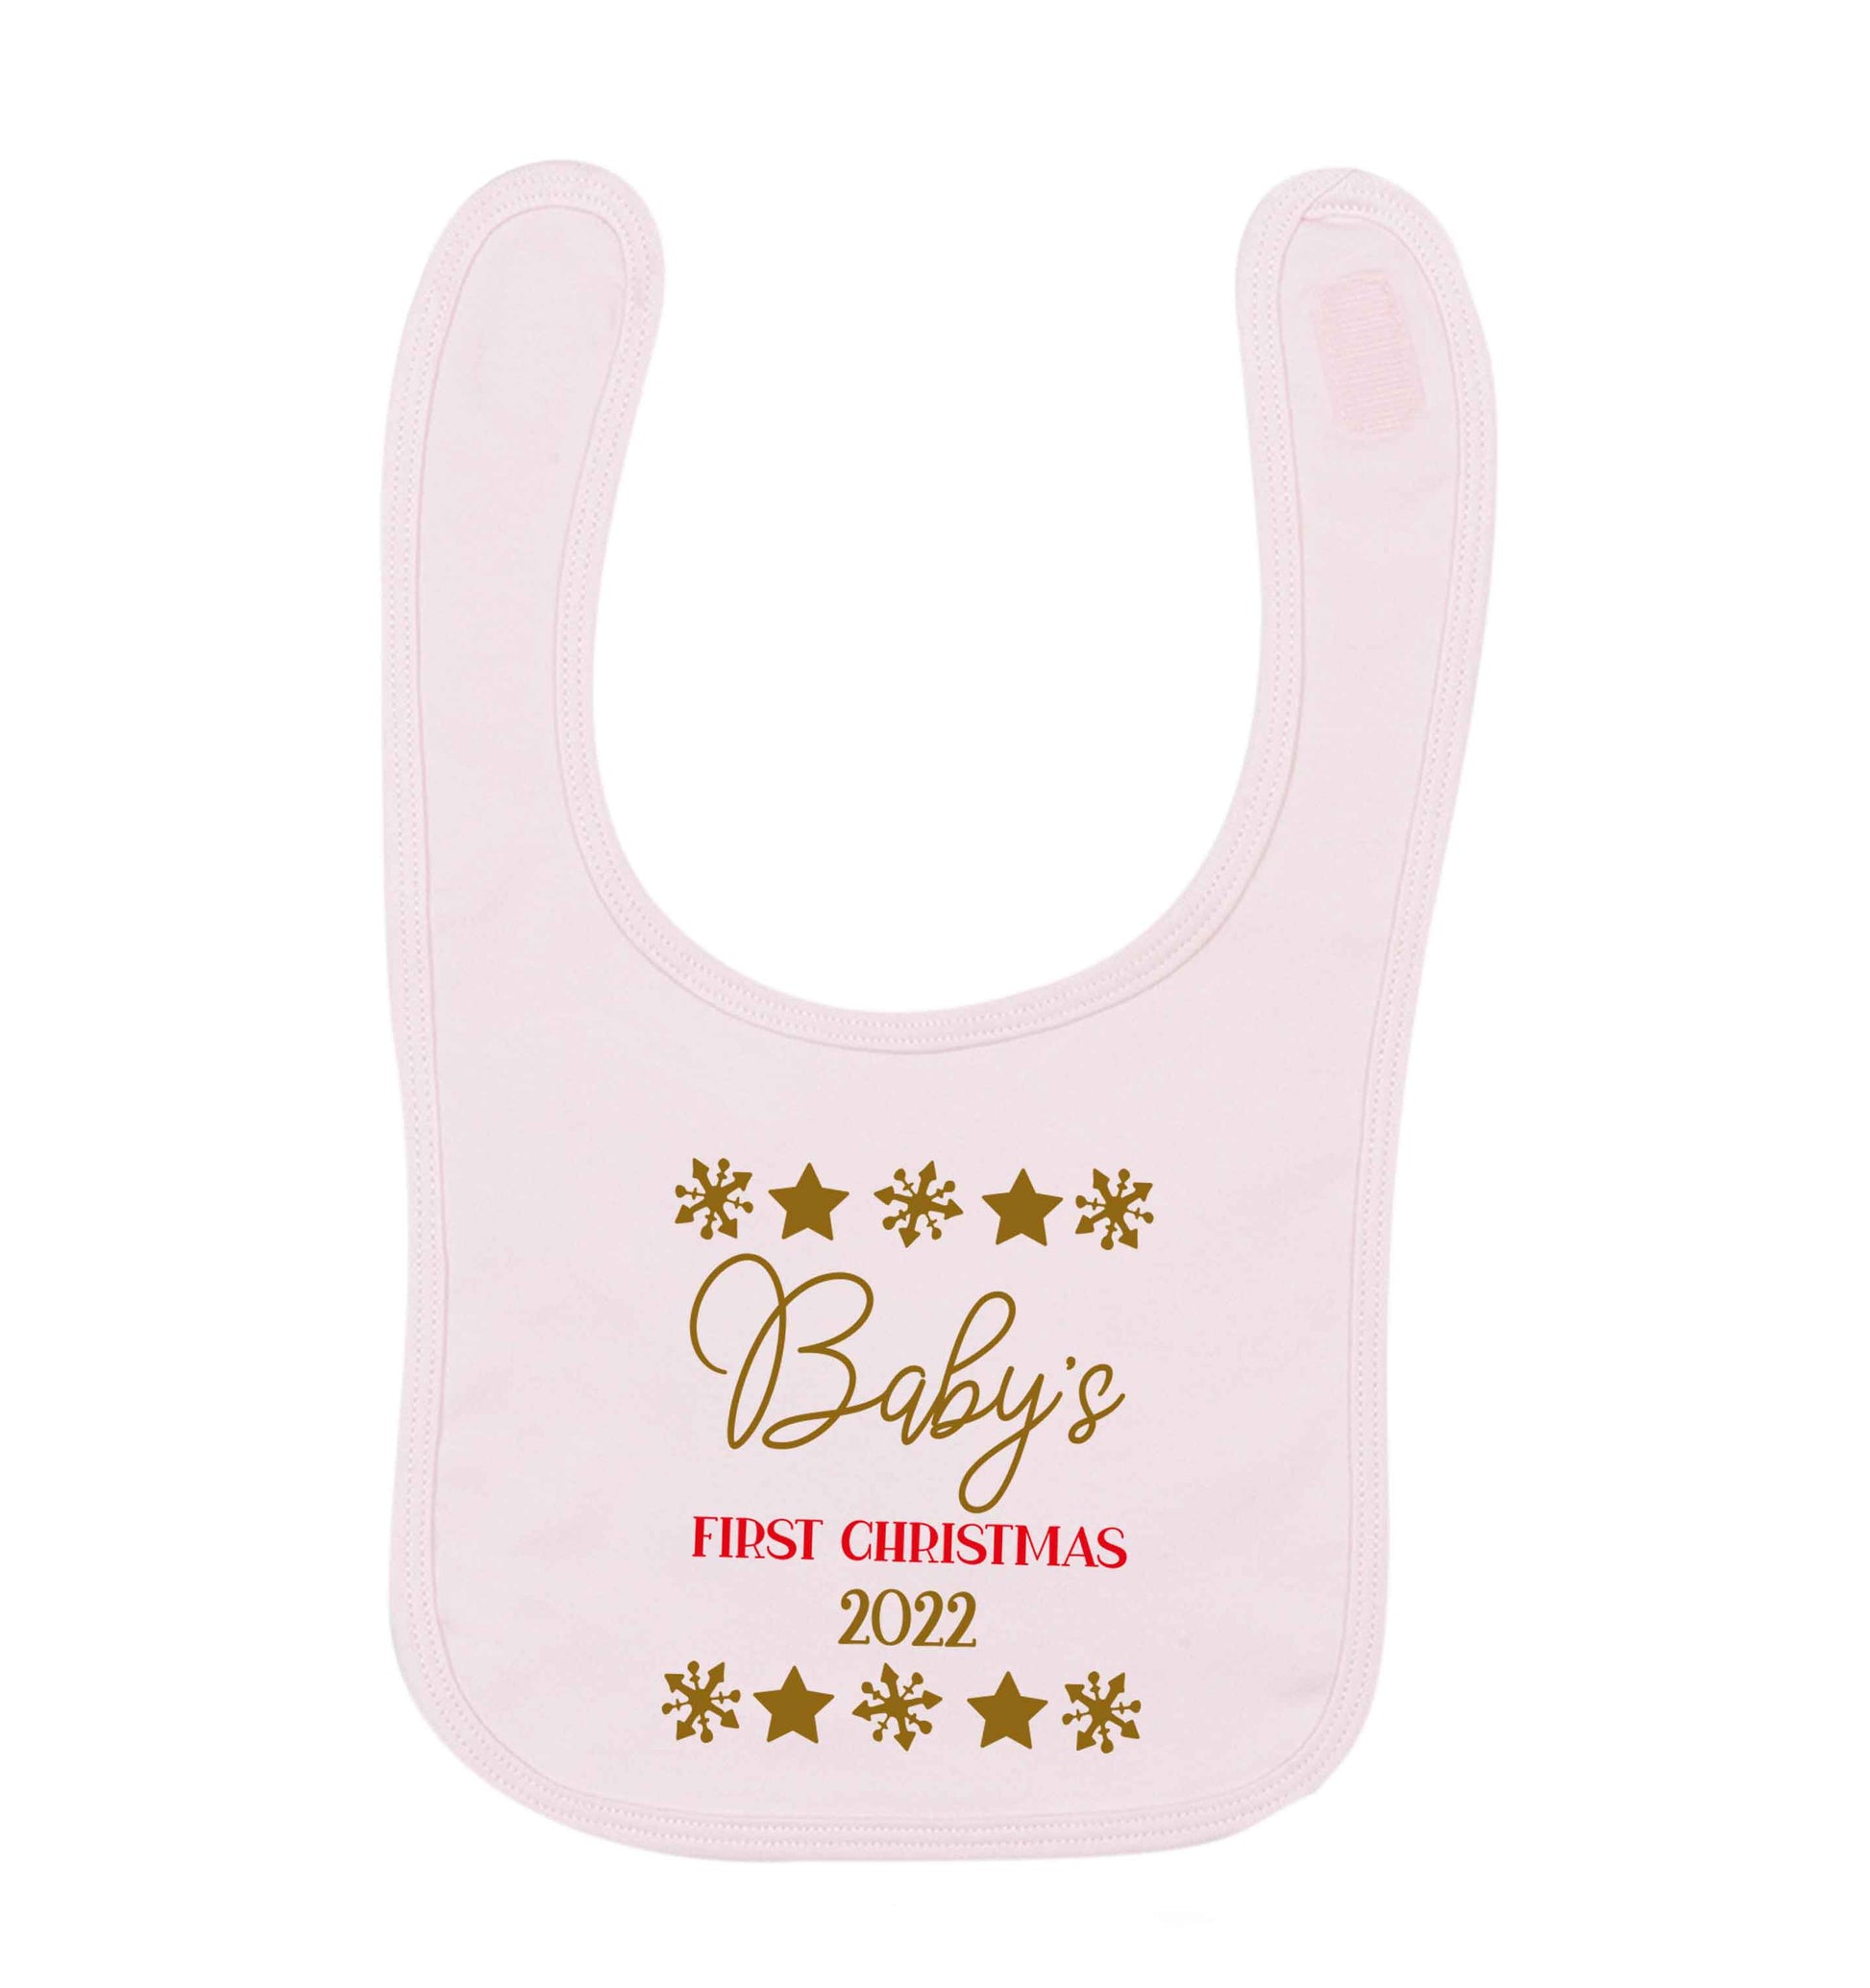 Baby's first Christmas pale pink baby bib